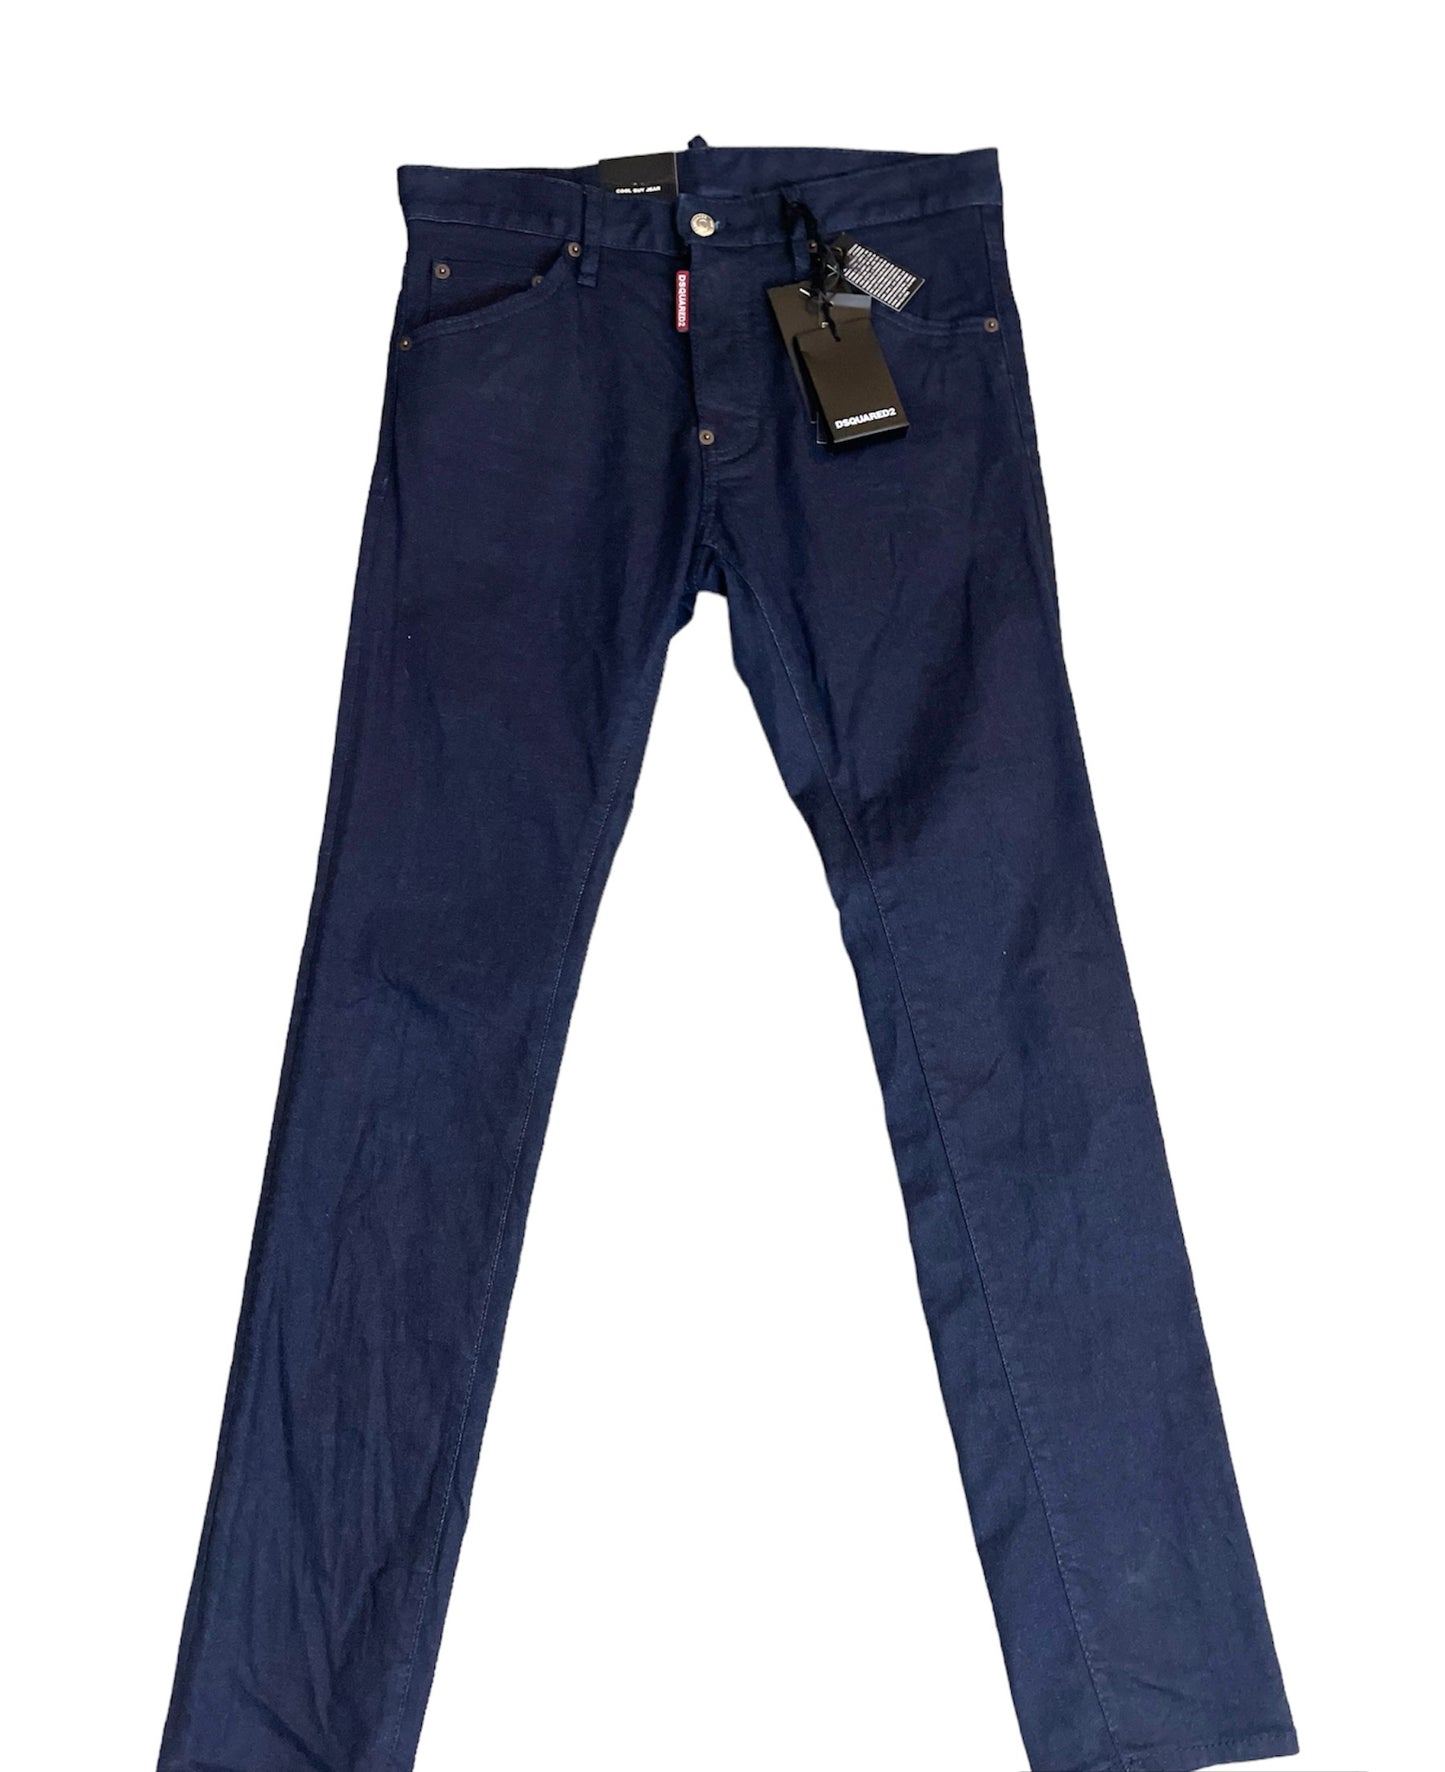 DSQUARED2 COOL GUY SLIM FIT JEANS - NAVY